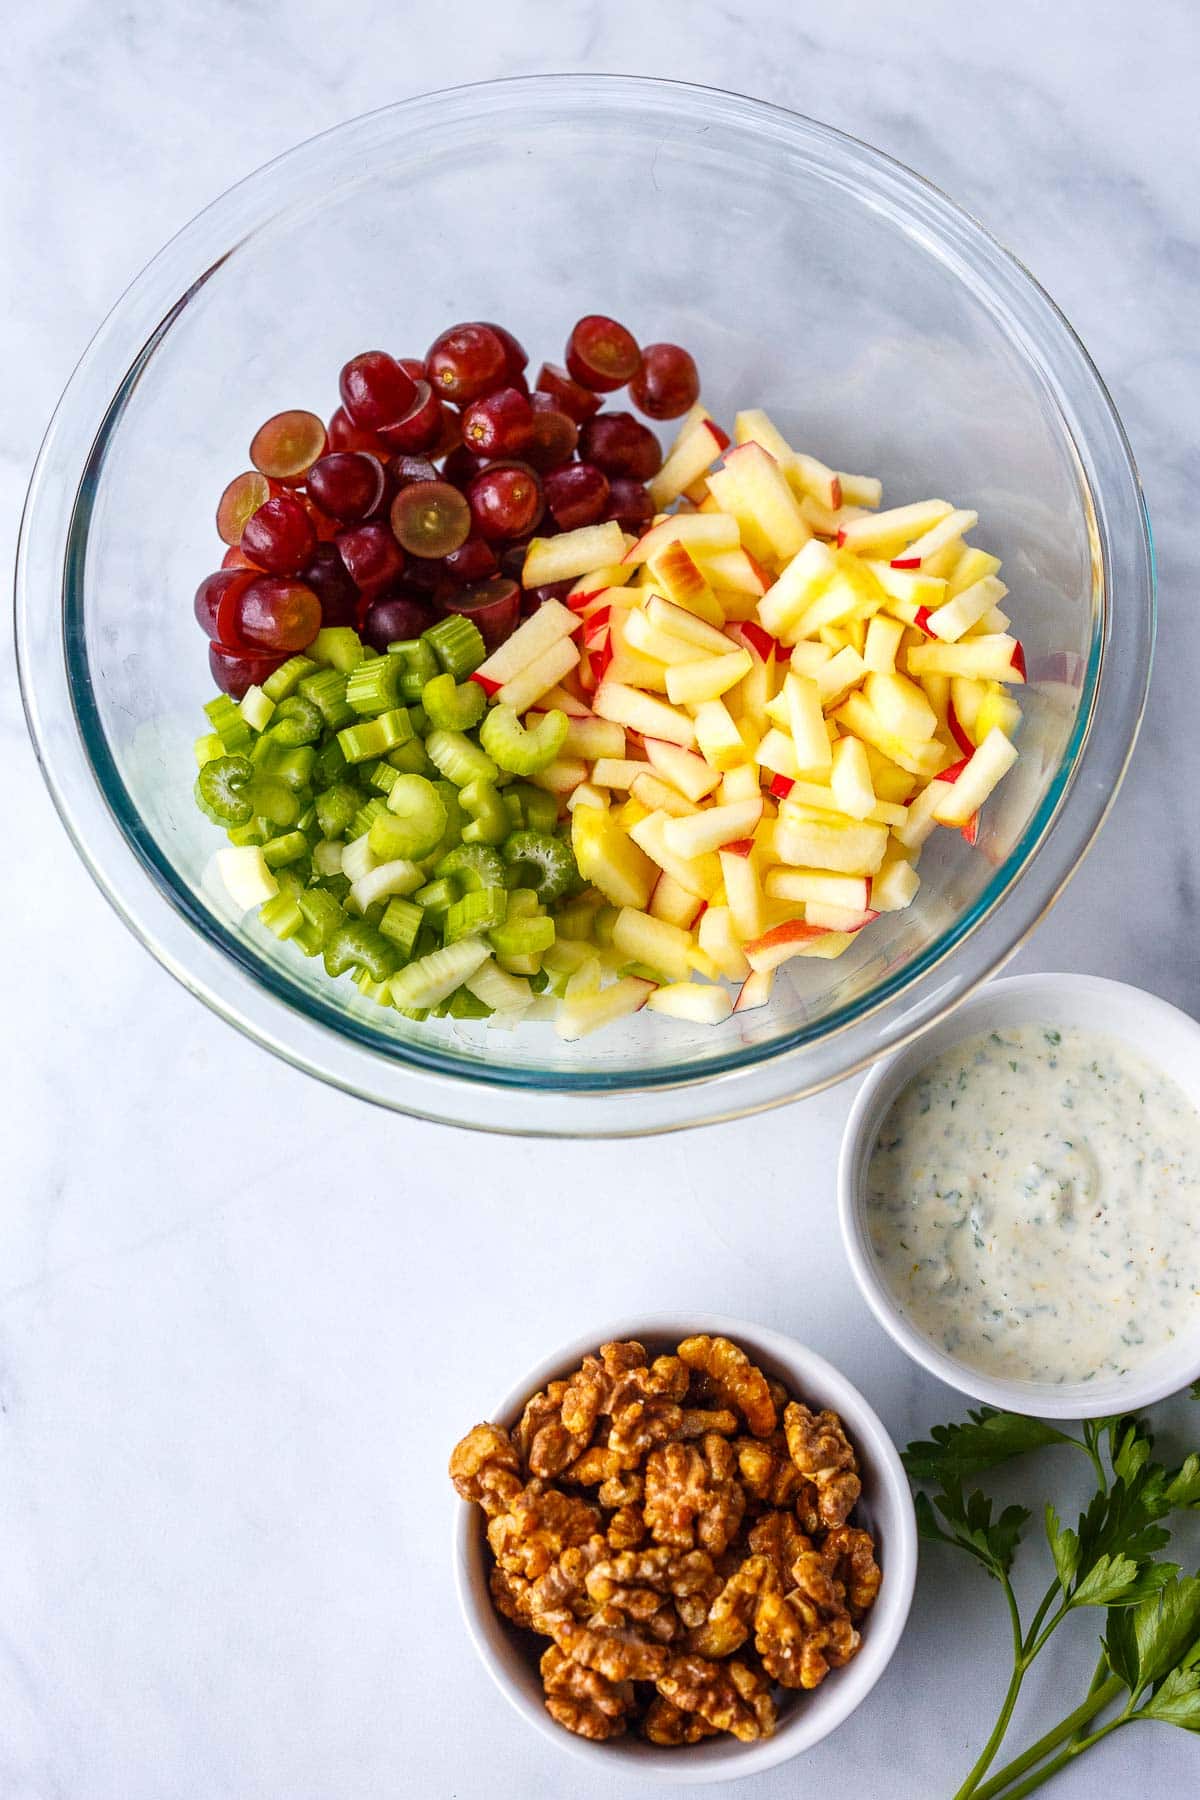 Waldorf Salad ingredients in a bowl with a seperate bowl of dressing and walnuts.